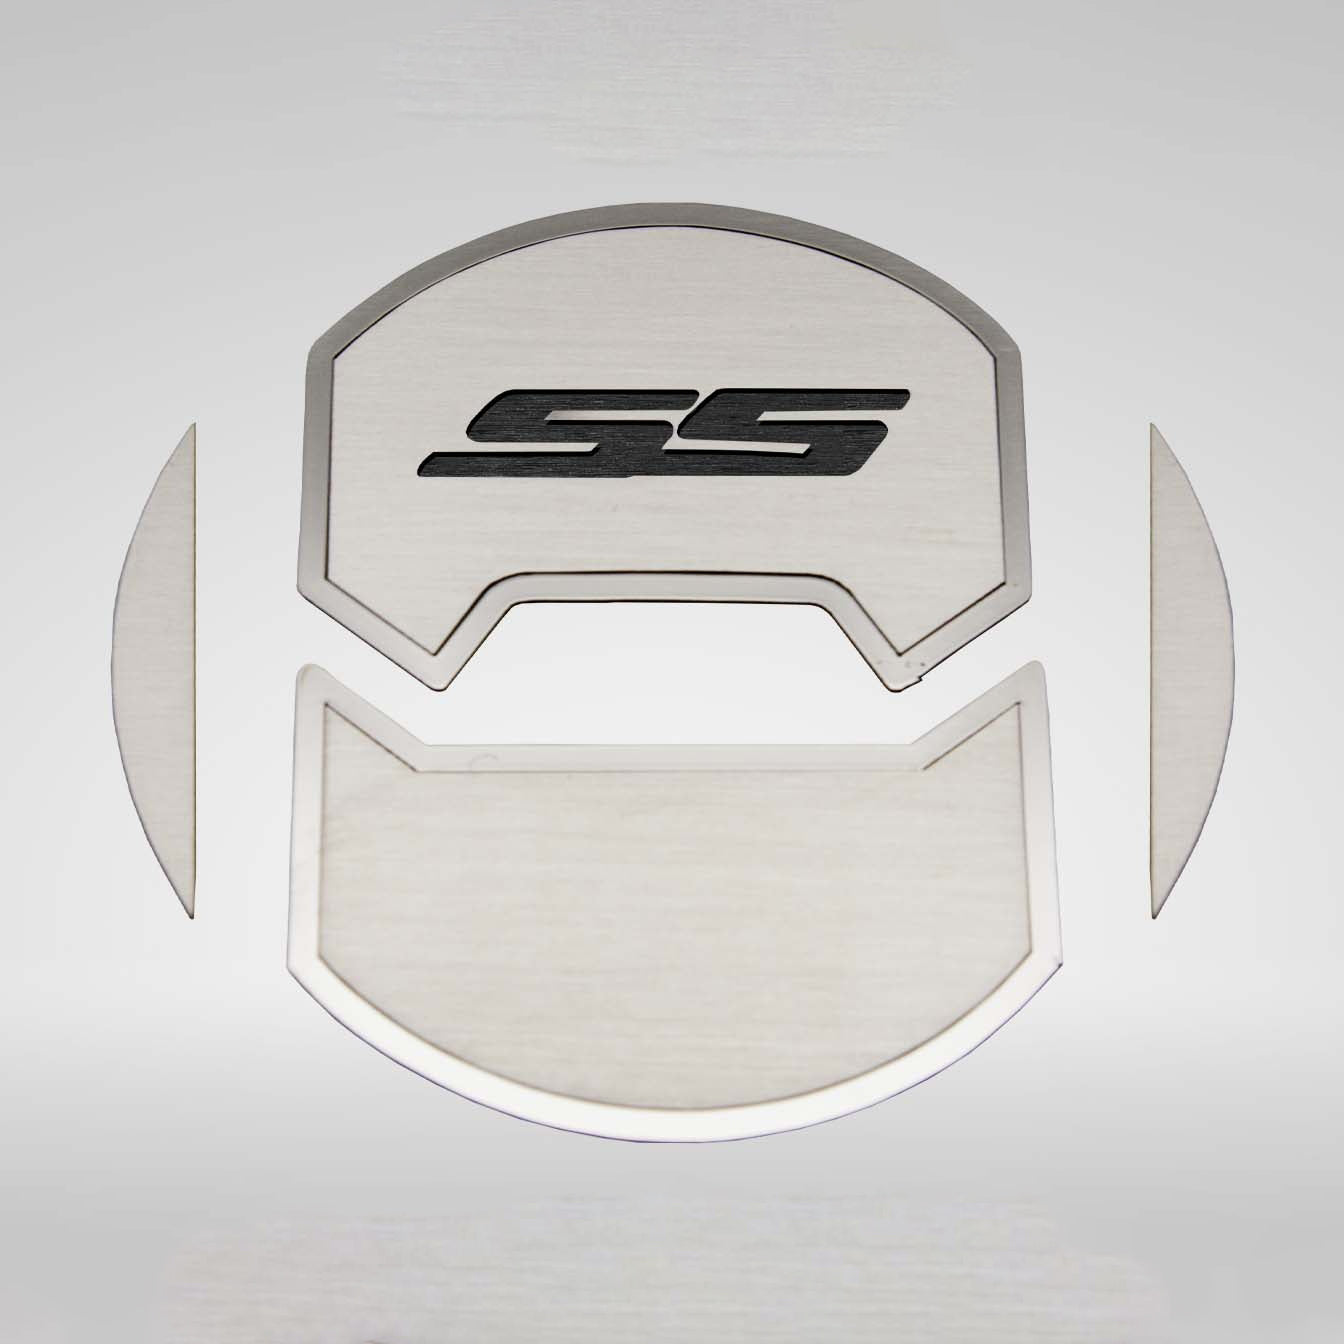 2010-2015 Camaro SS - Round A/C Vent Duct Covers Deluxe 'SS' 8Pc - Brushed Stainless, Choose Inlay Color